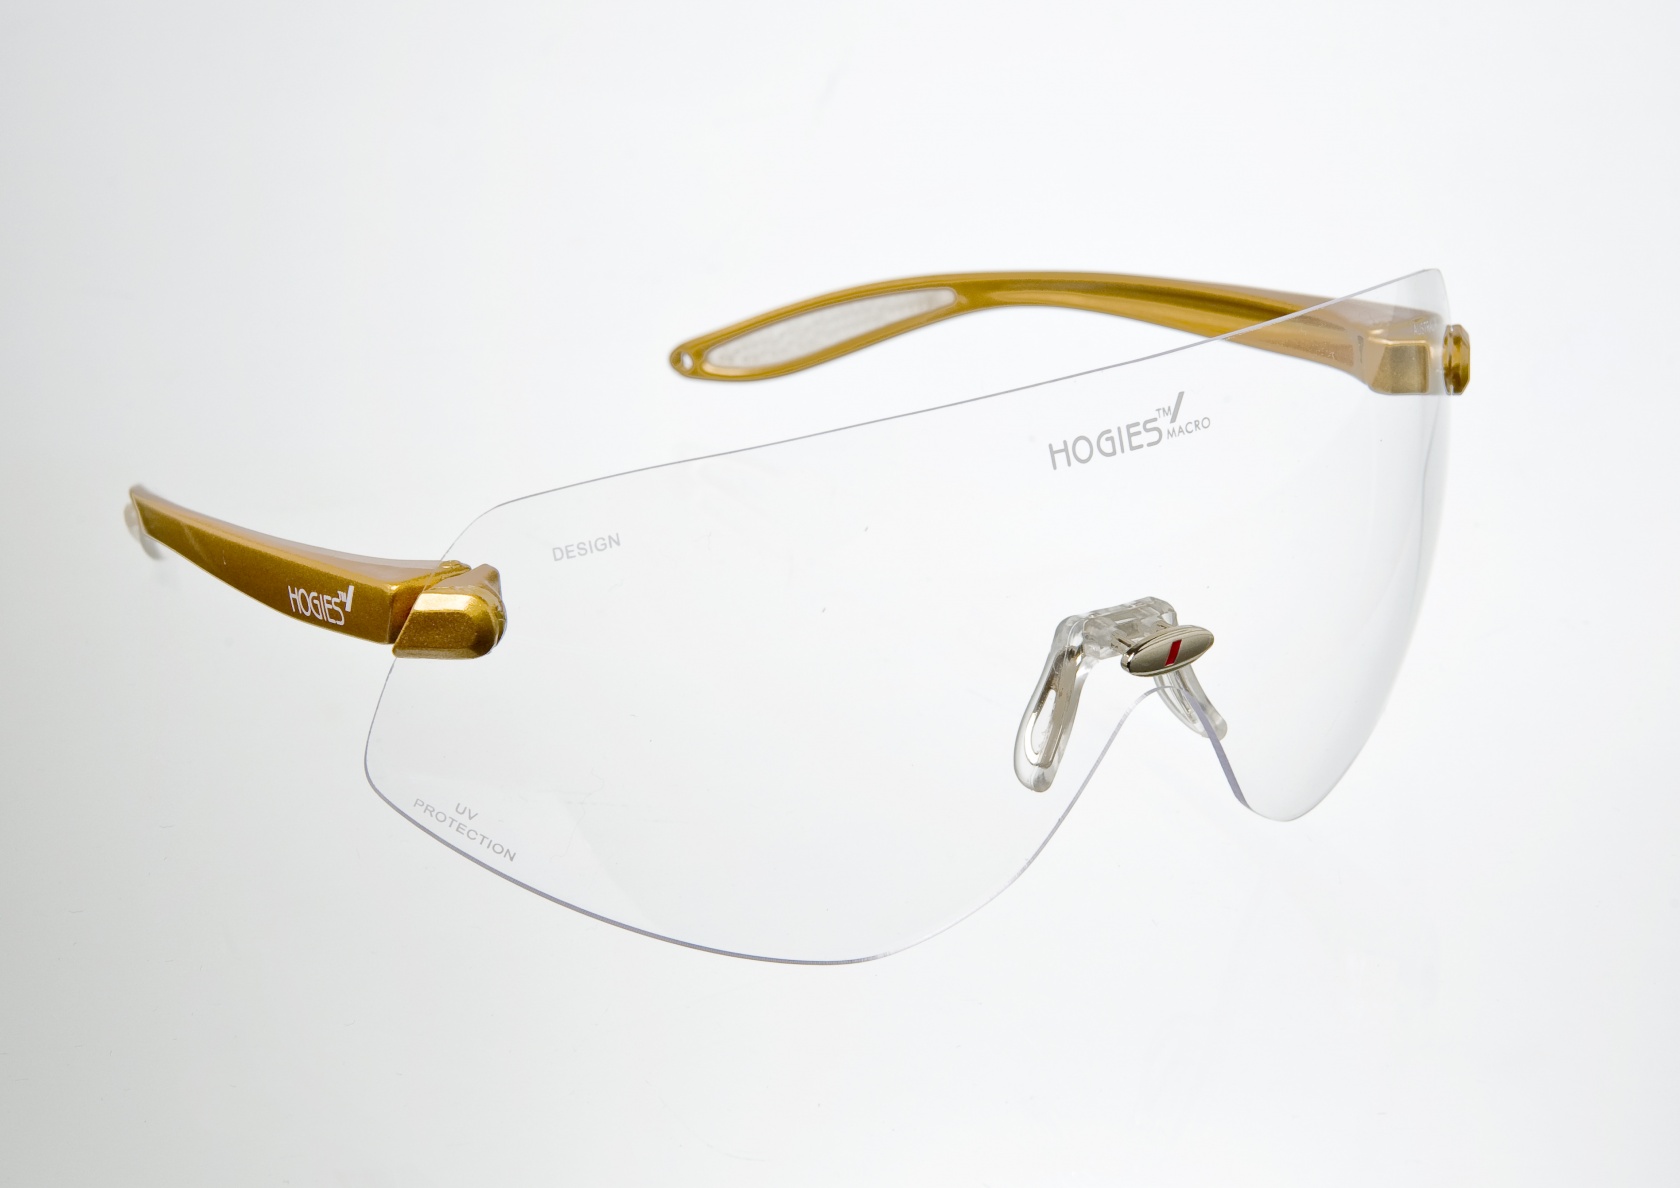 Glasses Hogies Eyeguard Clear Lens Gold arms